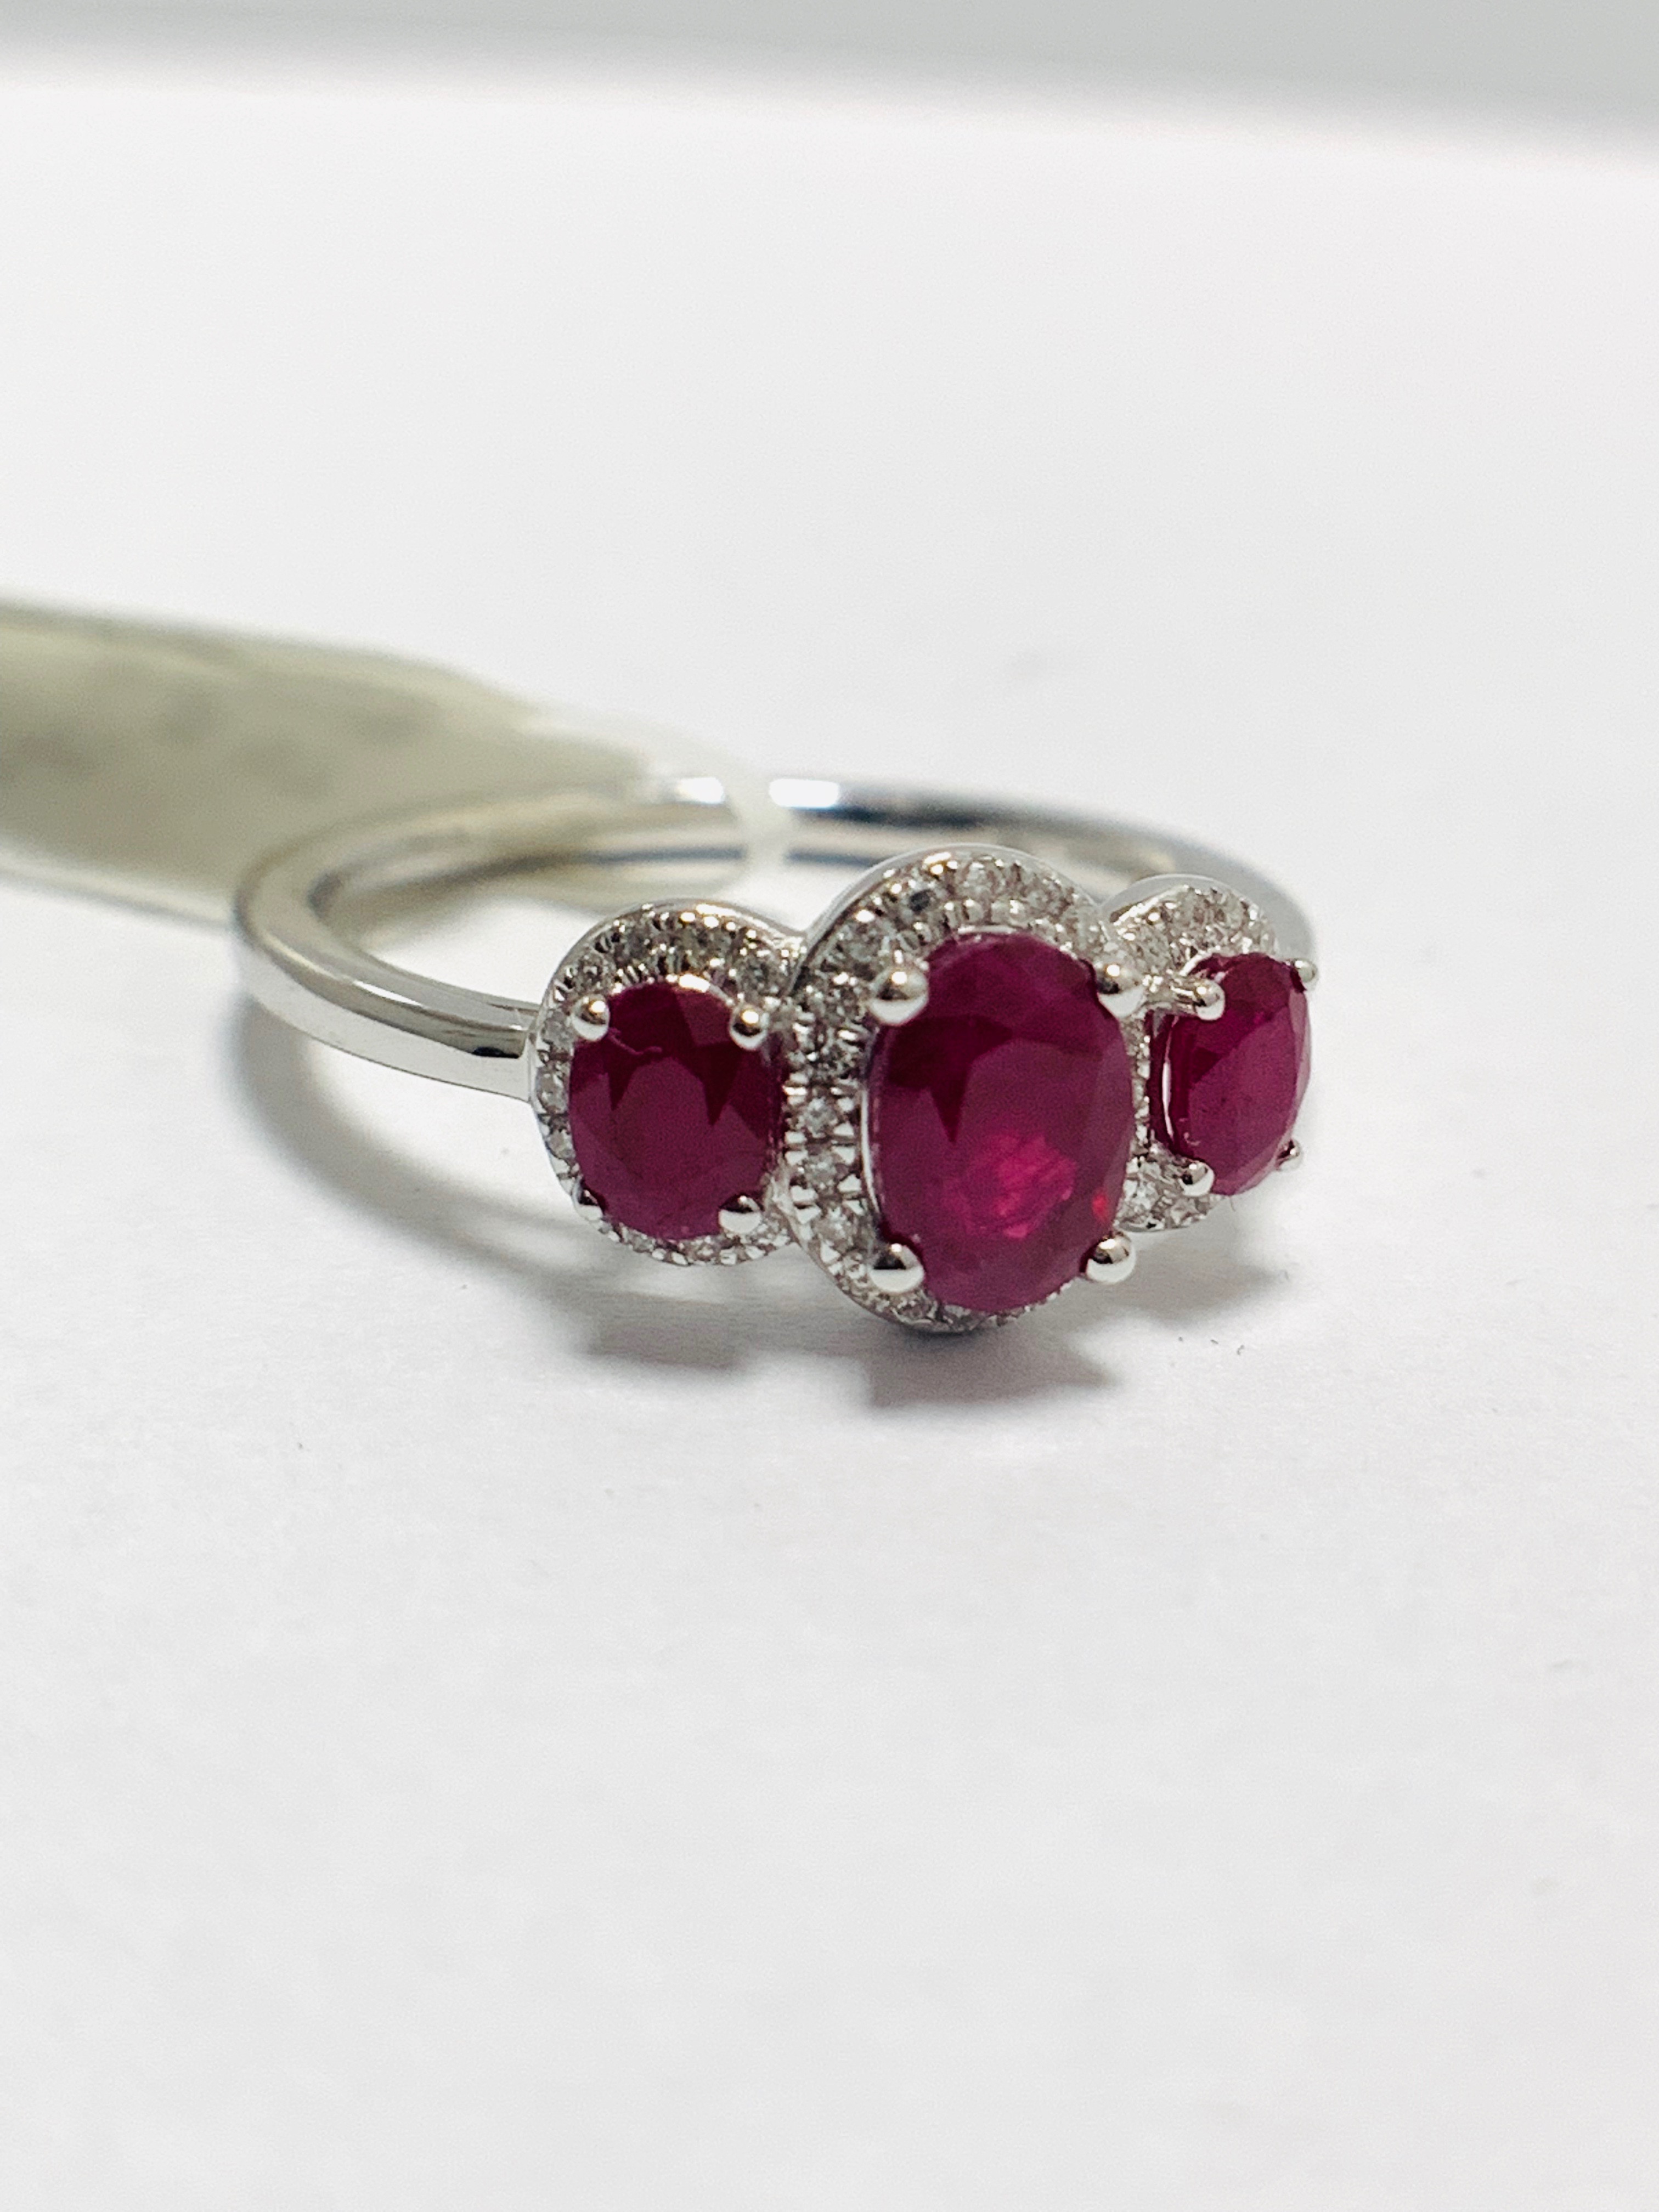 9ct white Gold Ruby trilogy style ring - Image 8 of 8